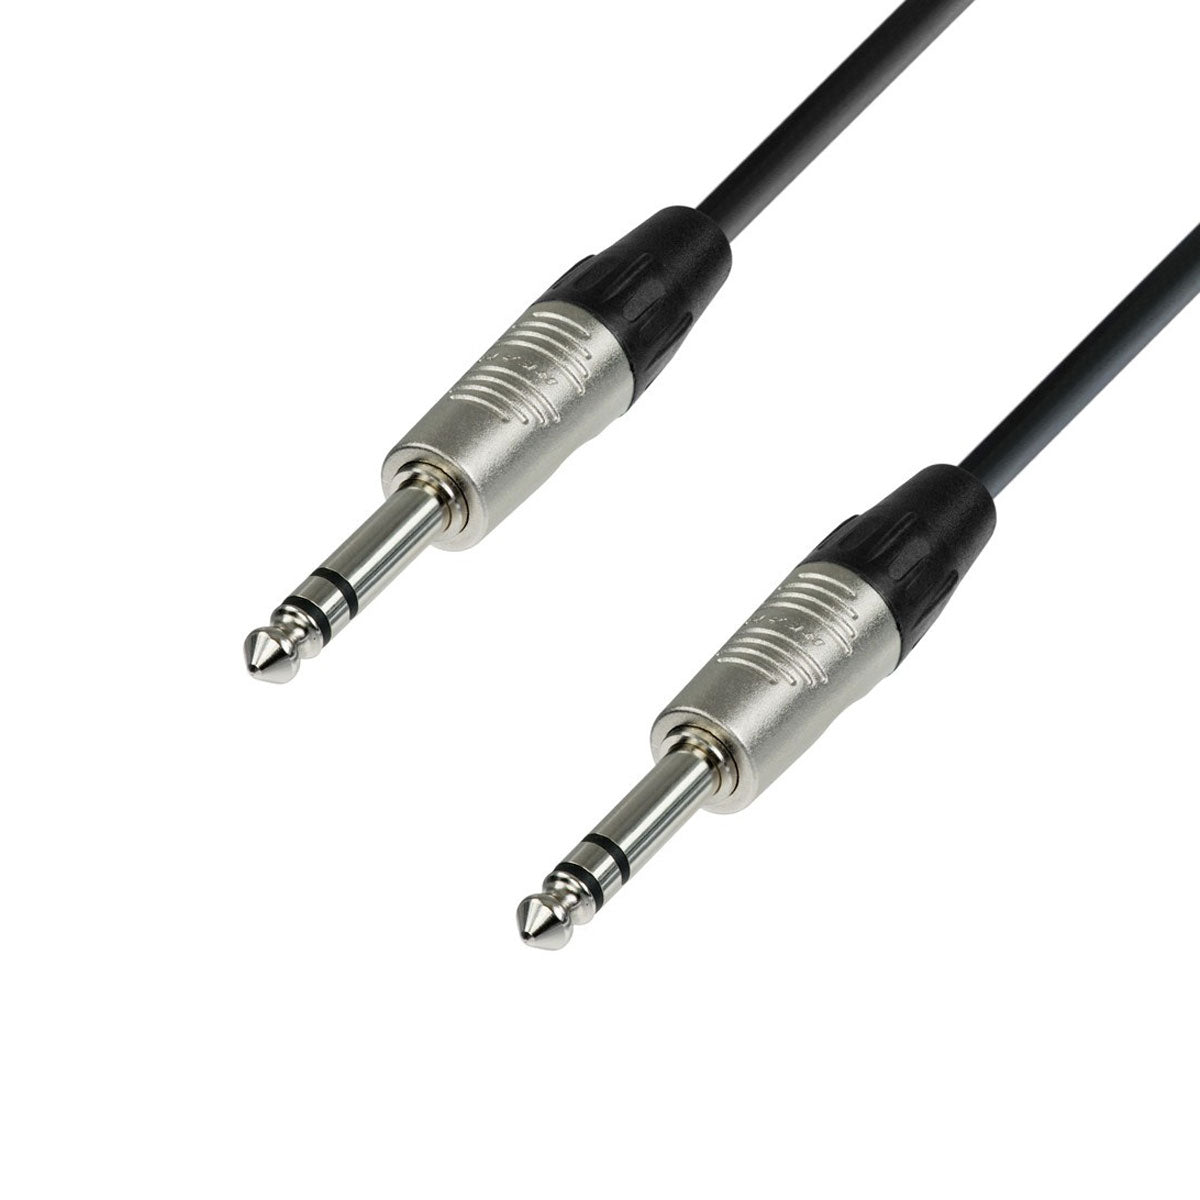 Adam Hall Cables K4 BVV 0300 - Patch Cable REAN 6.3mm Jack stereo to 6.3mm Jack stereo 3m